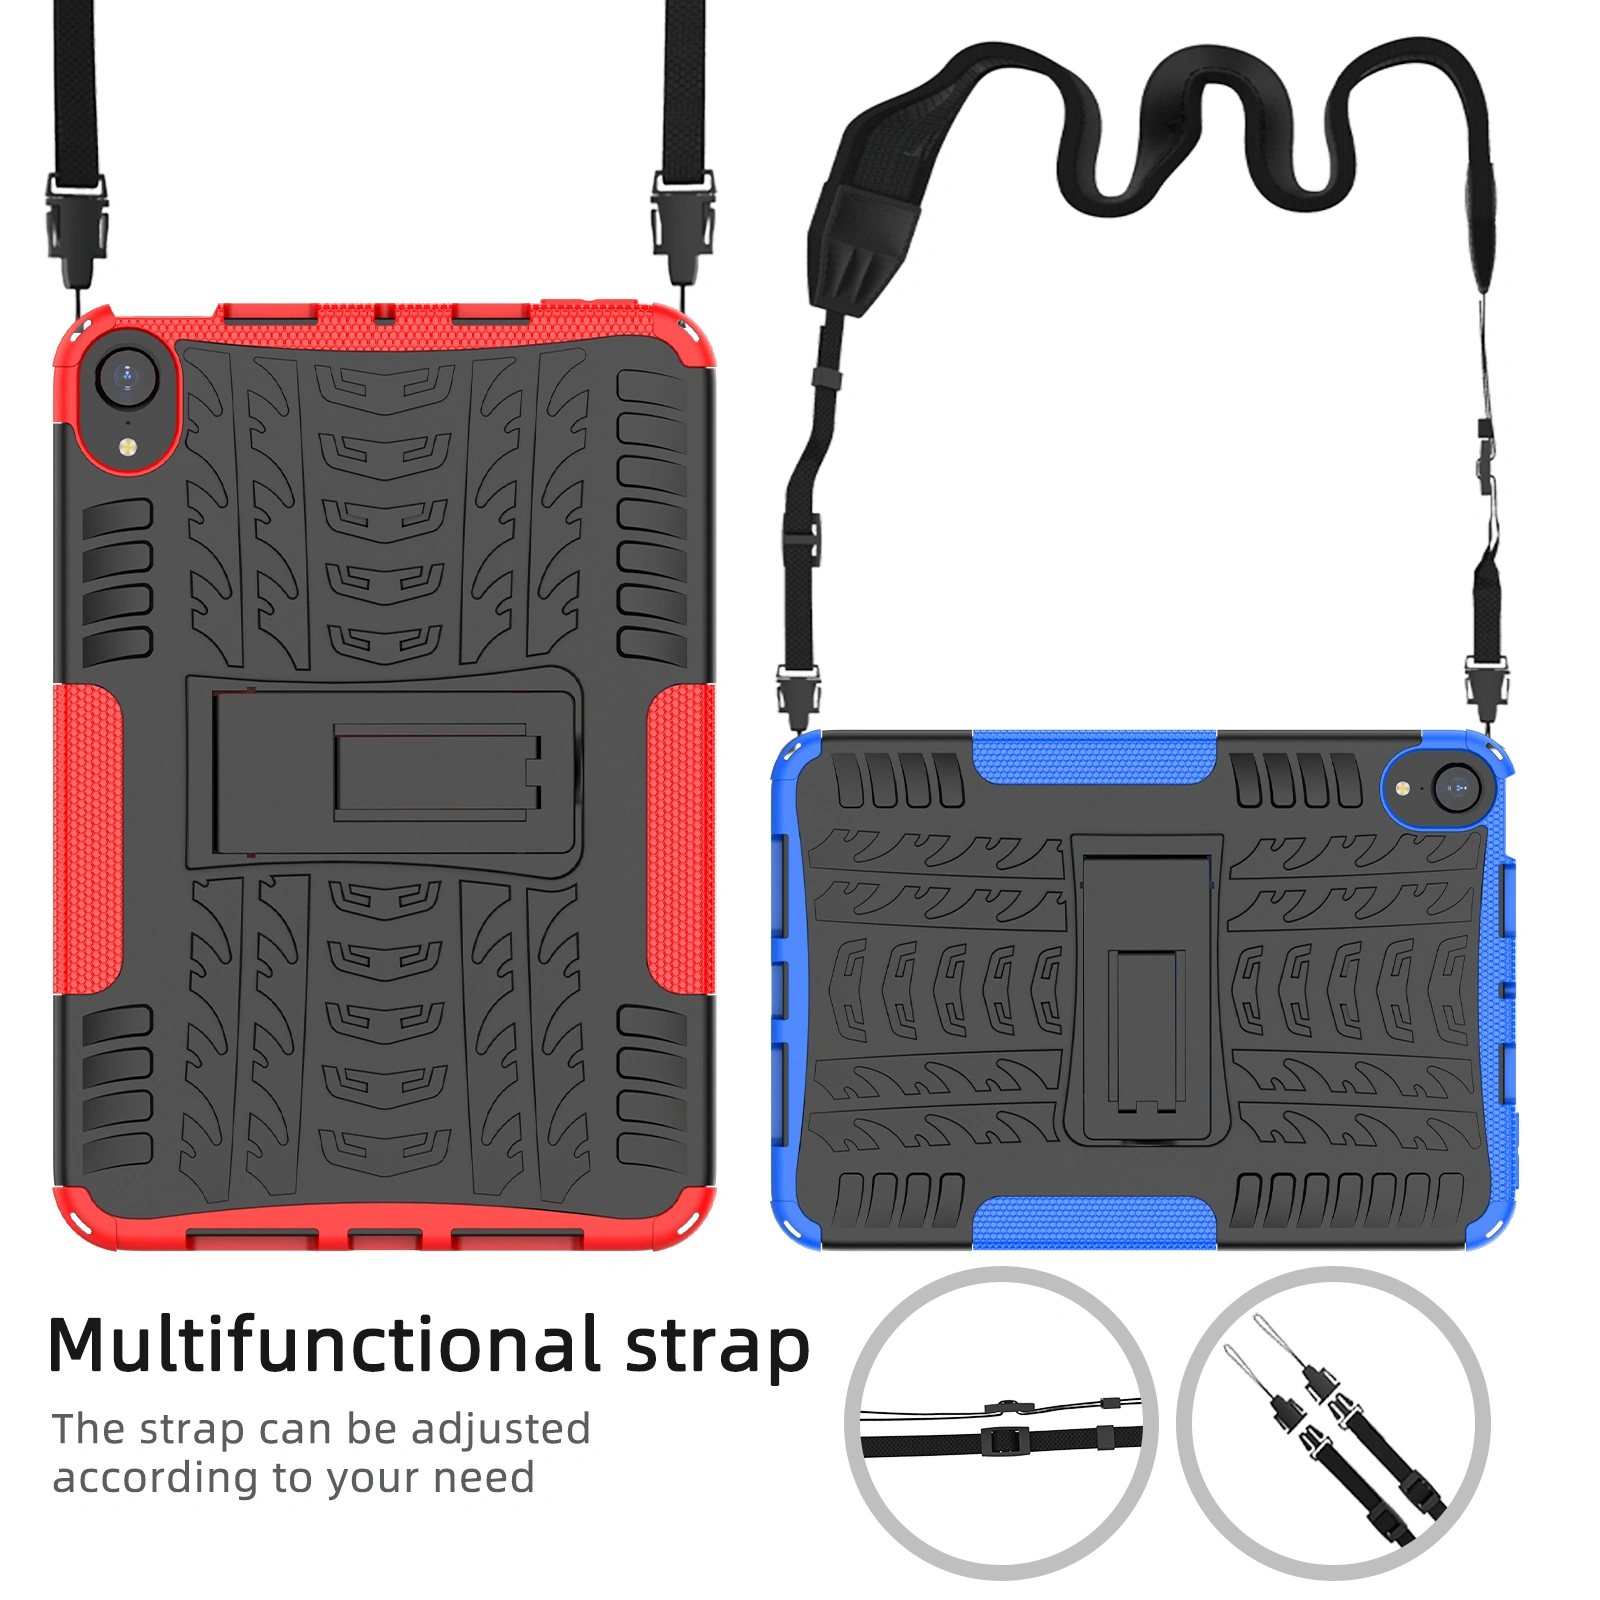 The strap can be adjusted according to your need